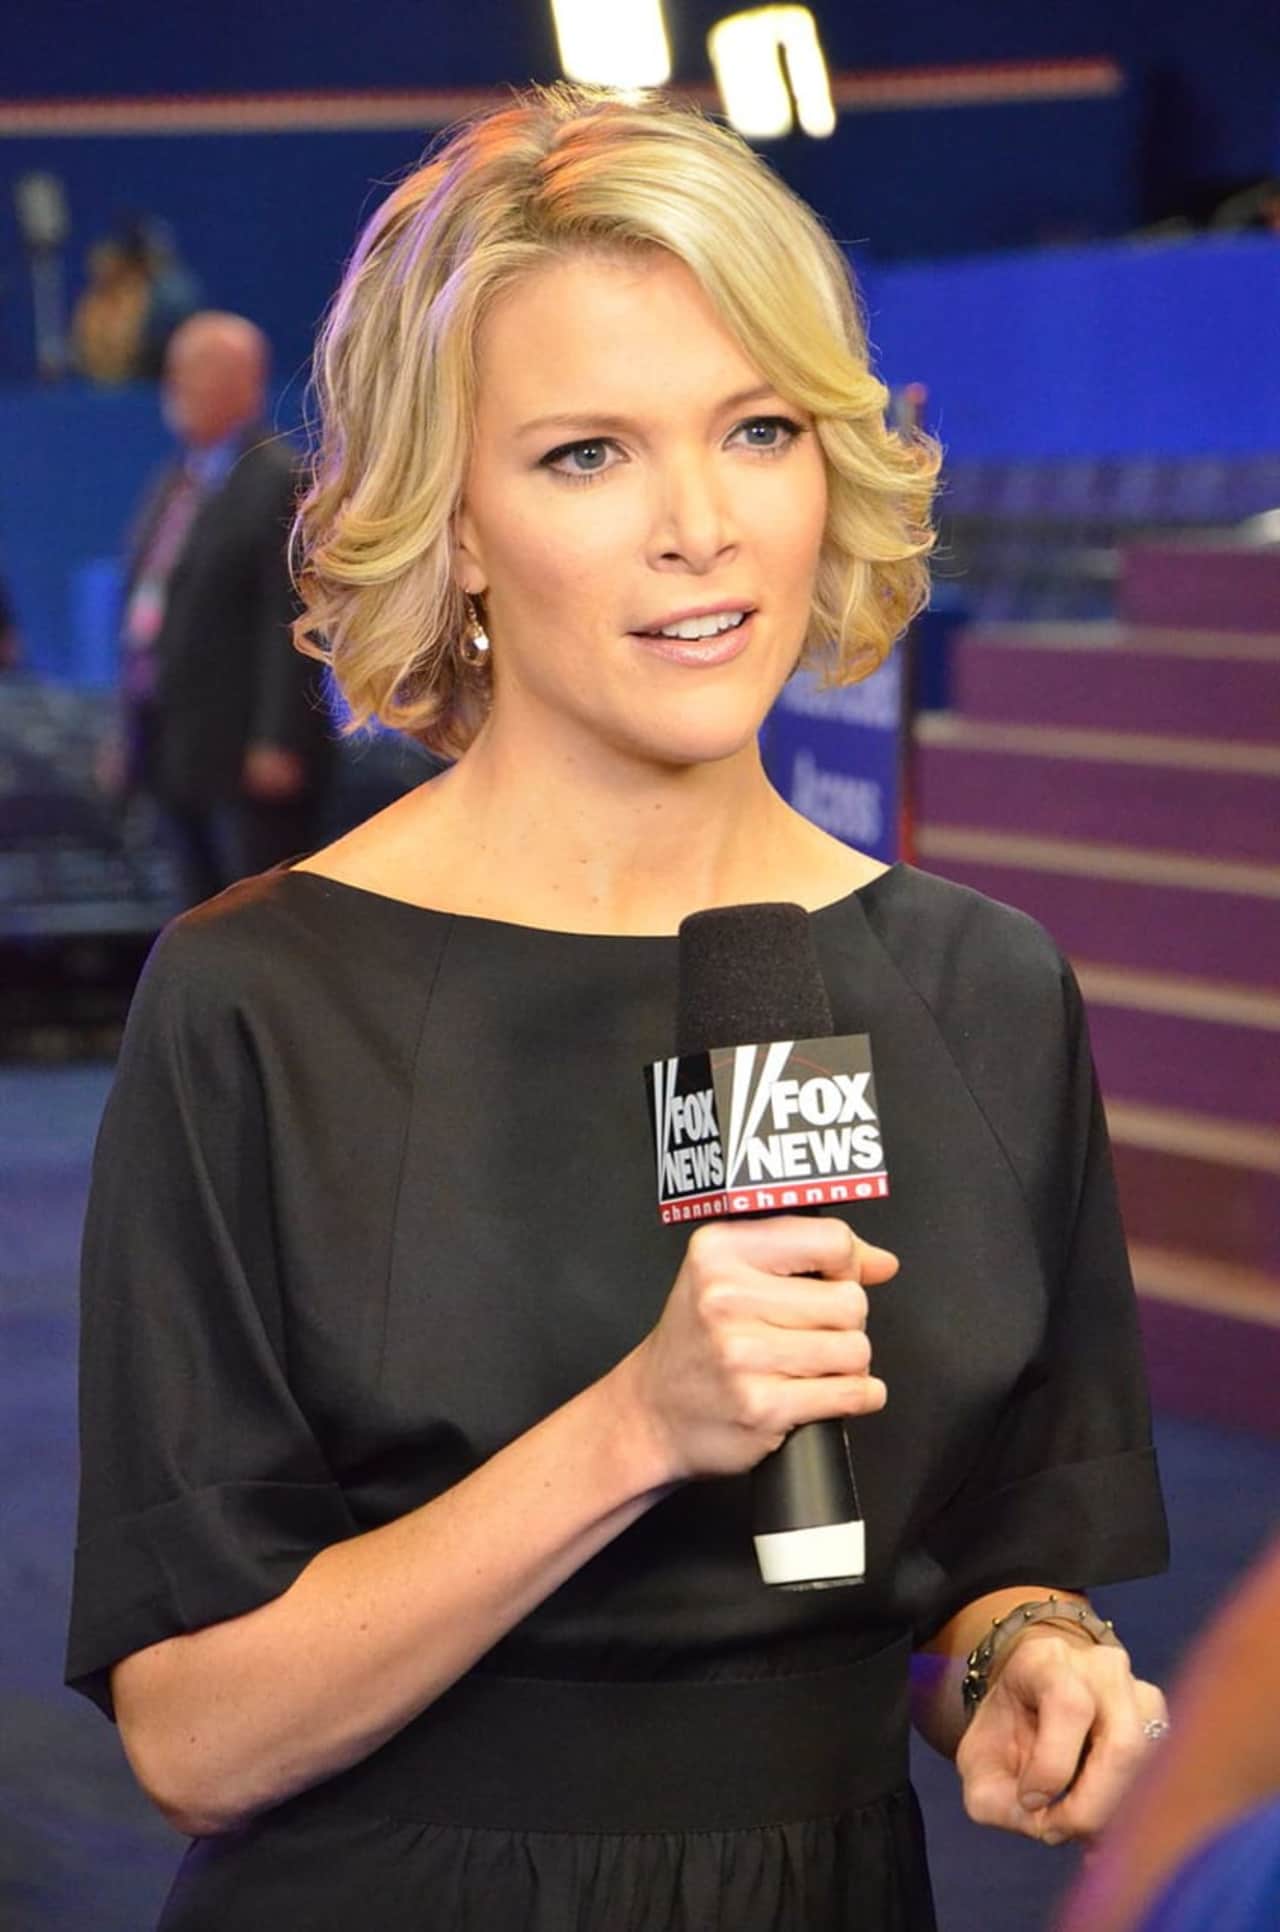 Megyn Kelly has been at the center of a firestorm since taping an interview with Alex Jones, the founder of "InfoWars."